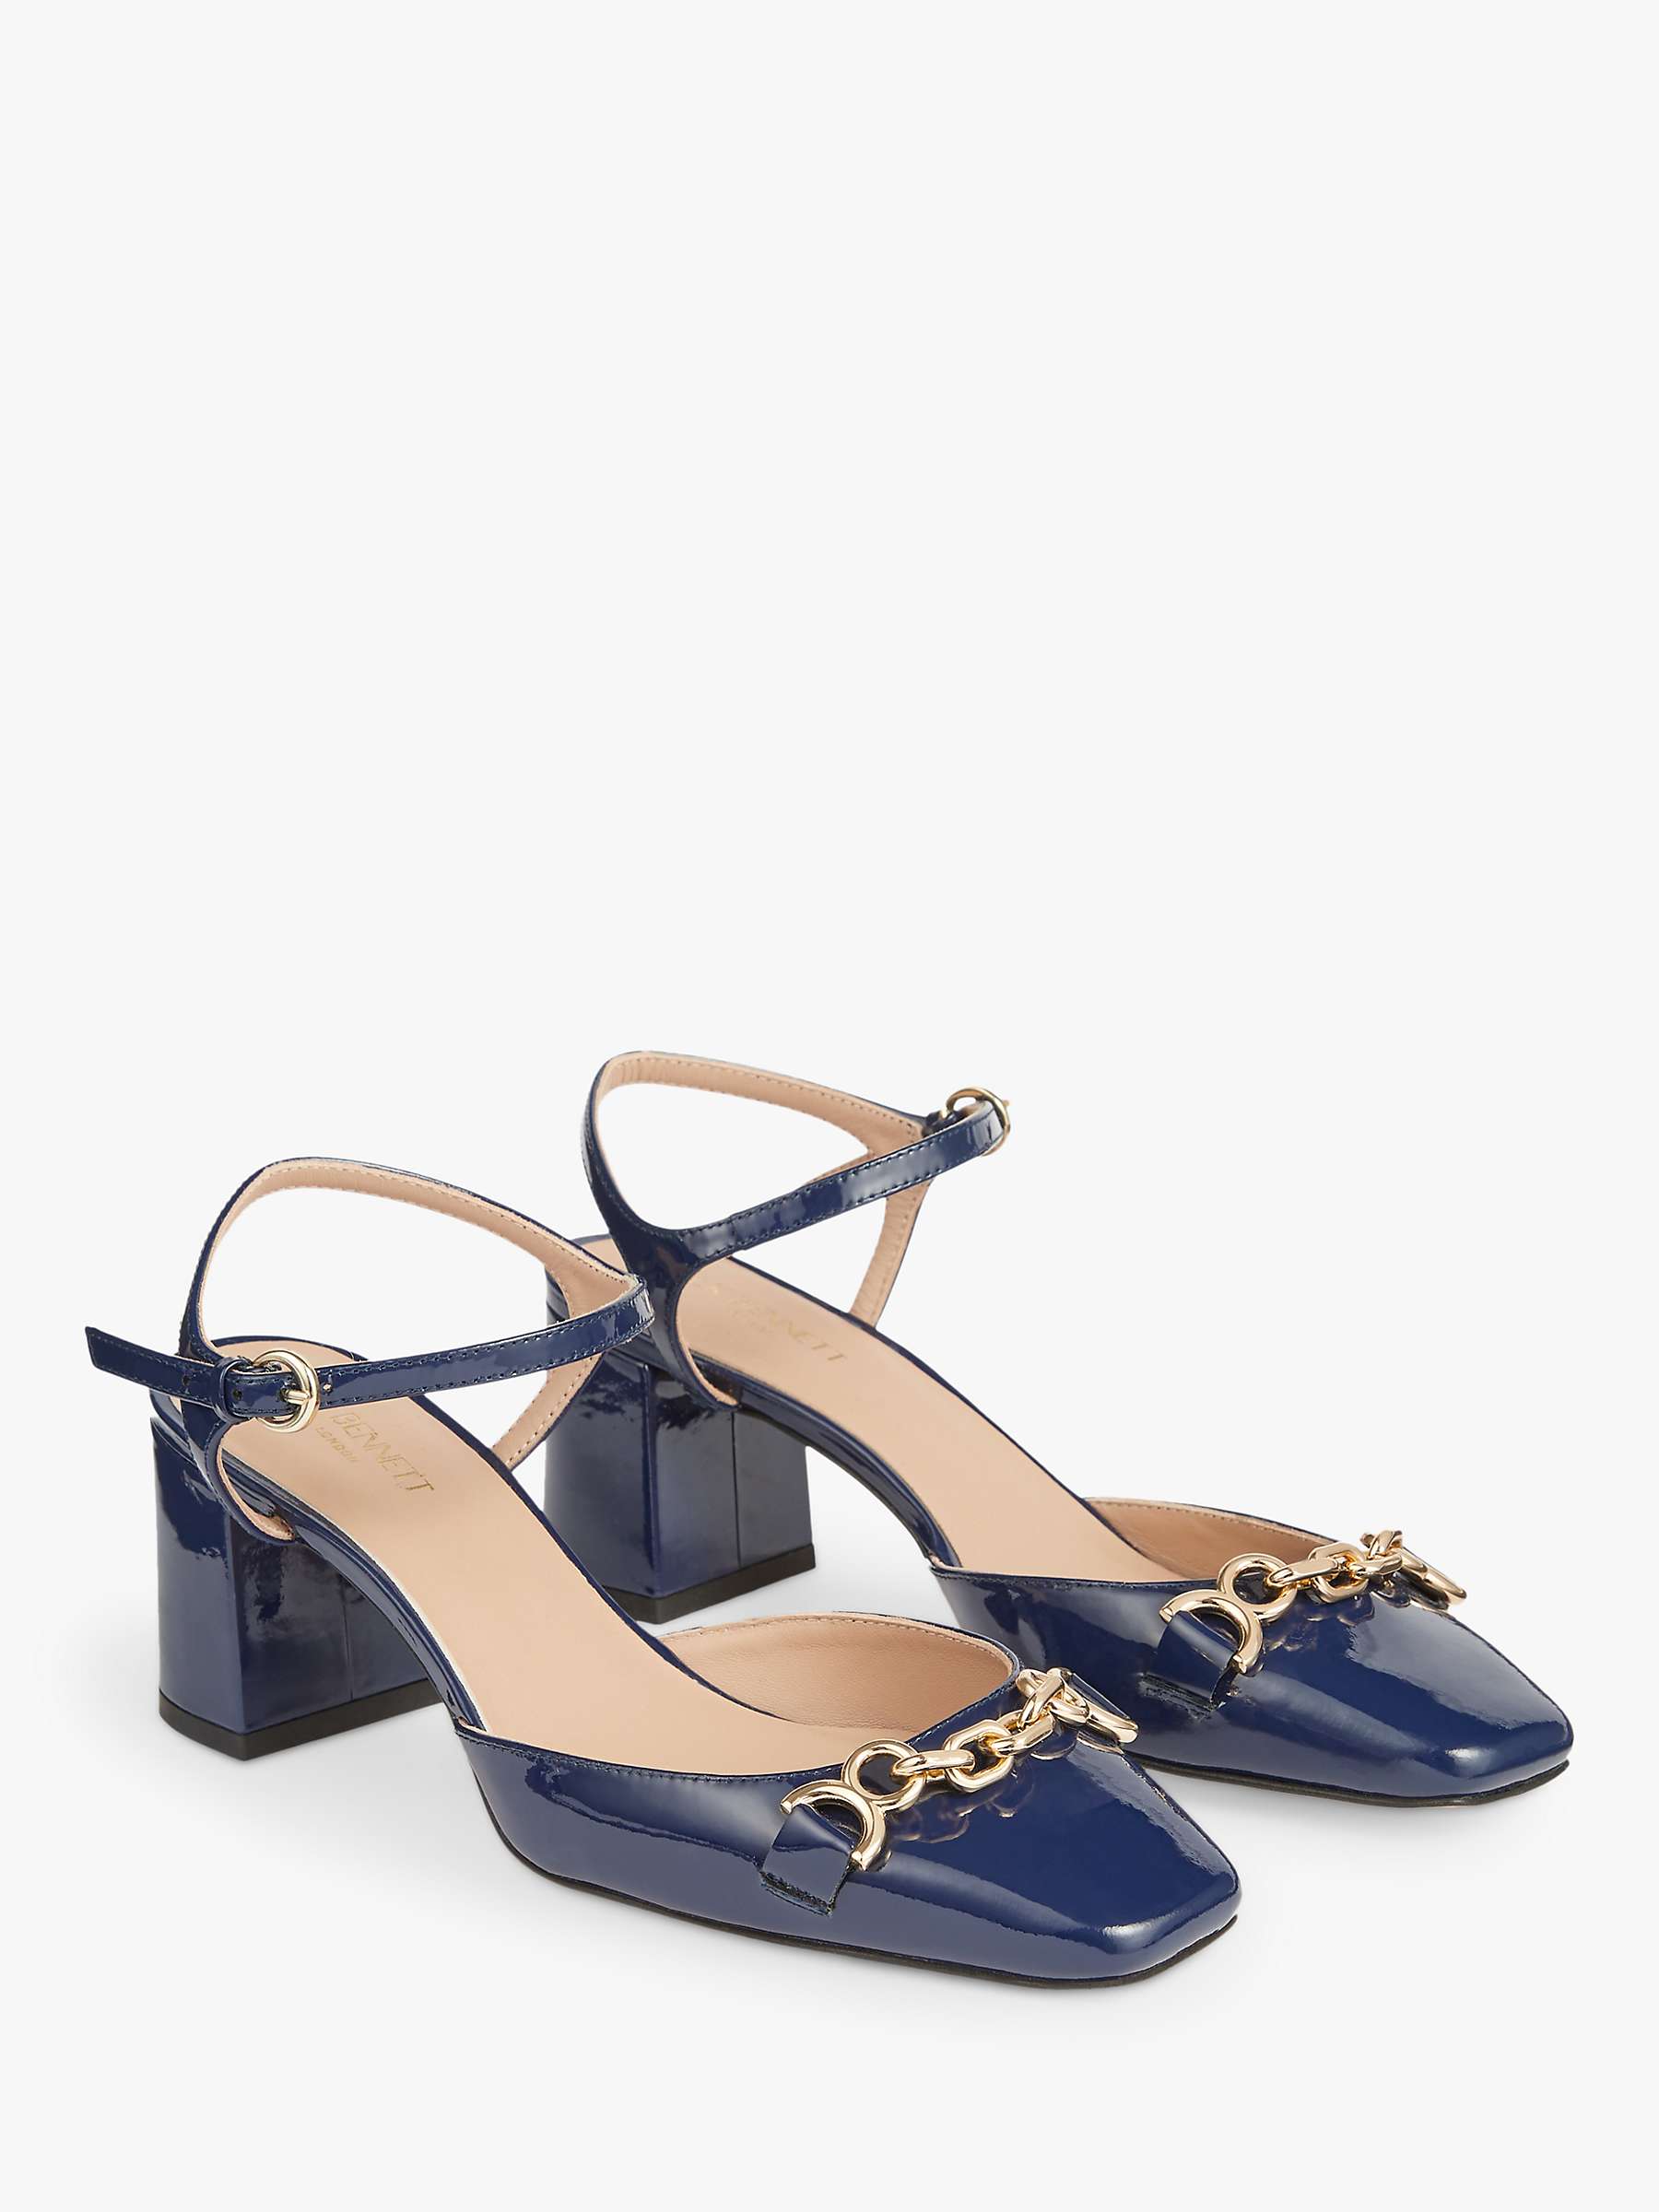 Buy L.K.Bennett Mindy Patent Leather Open Court Shoes, Navy Online at johnlewis.com